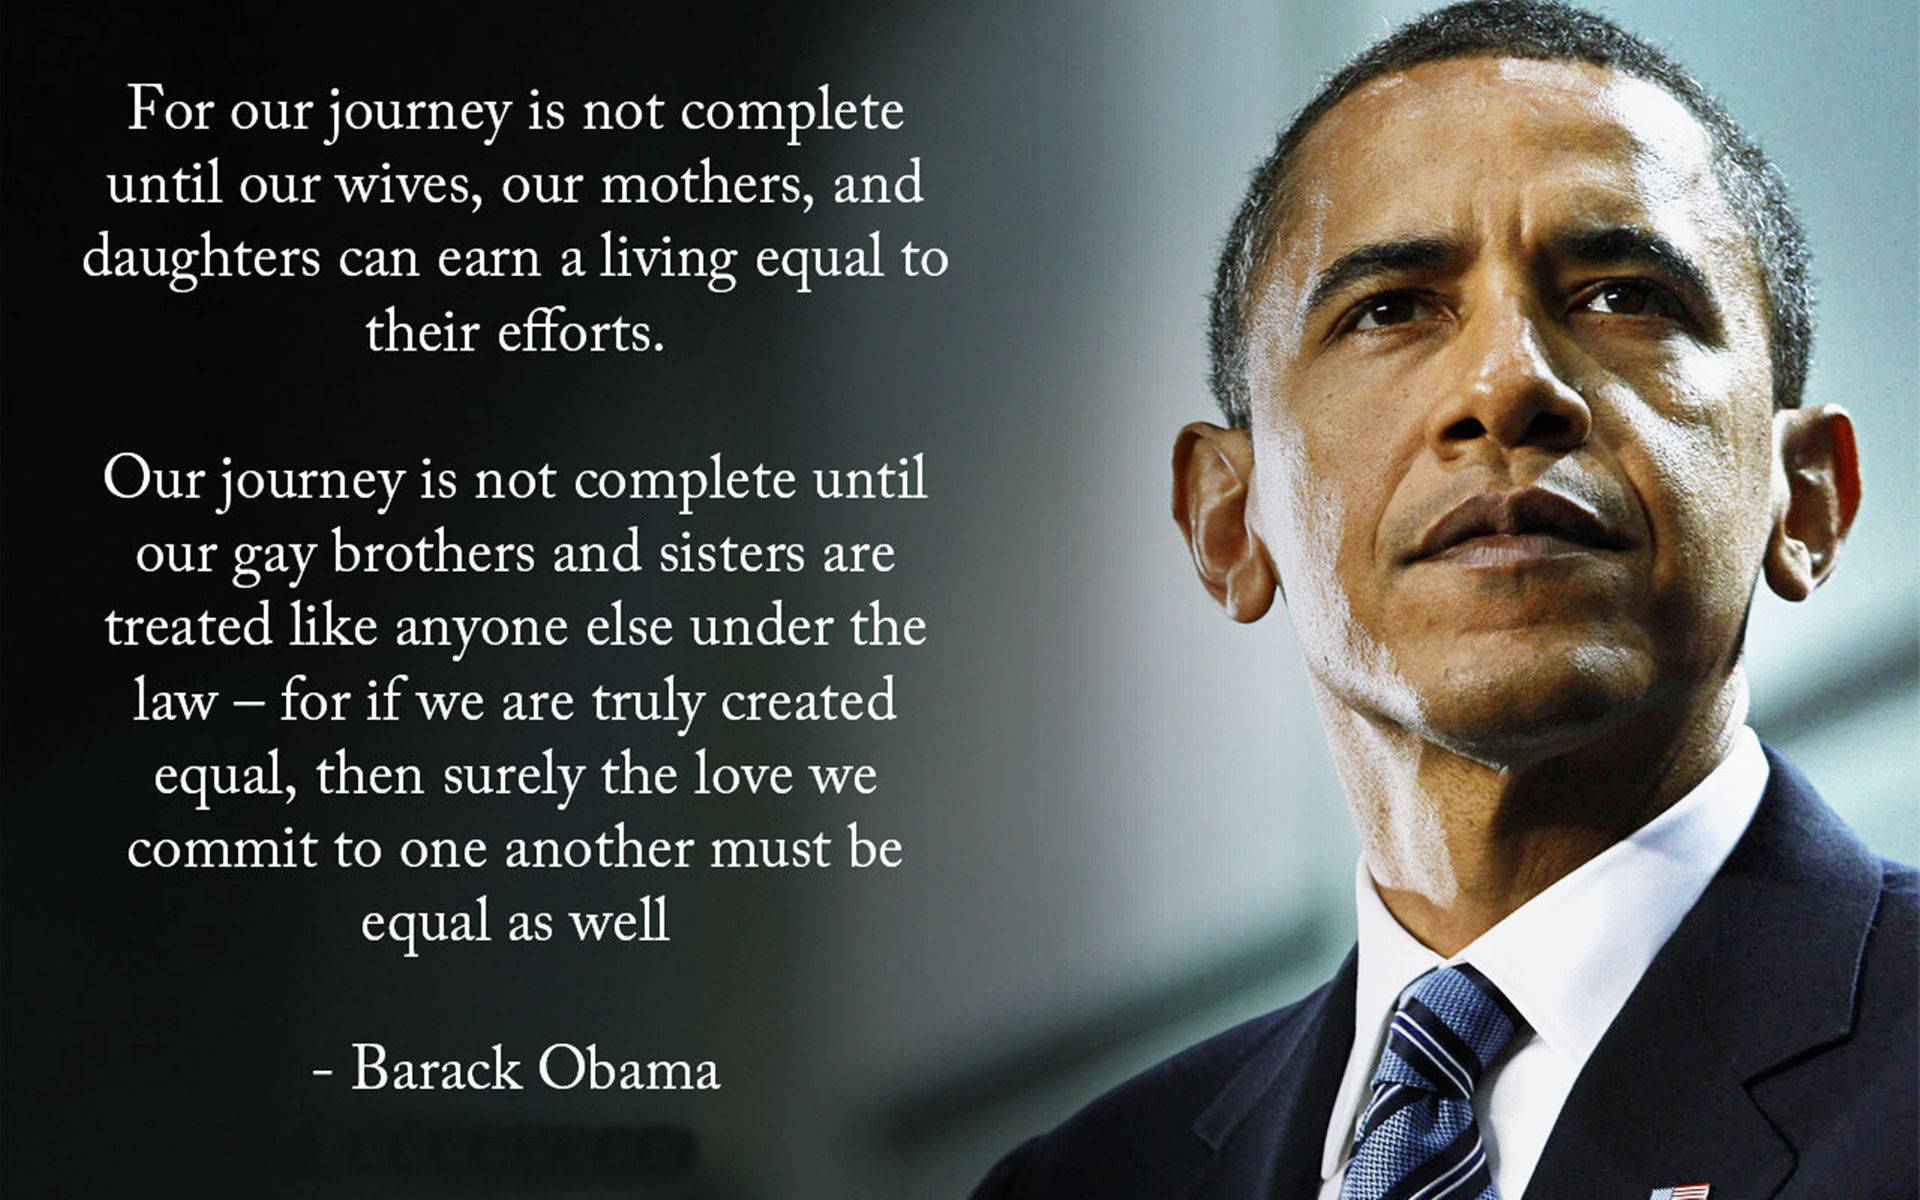 Barack Obama Quote From Speech